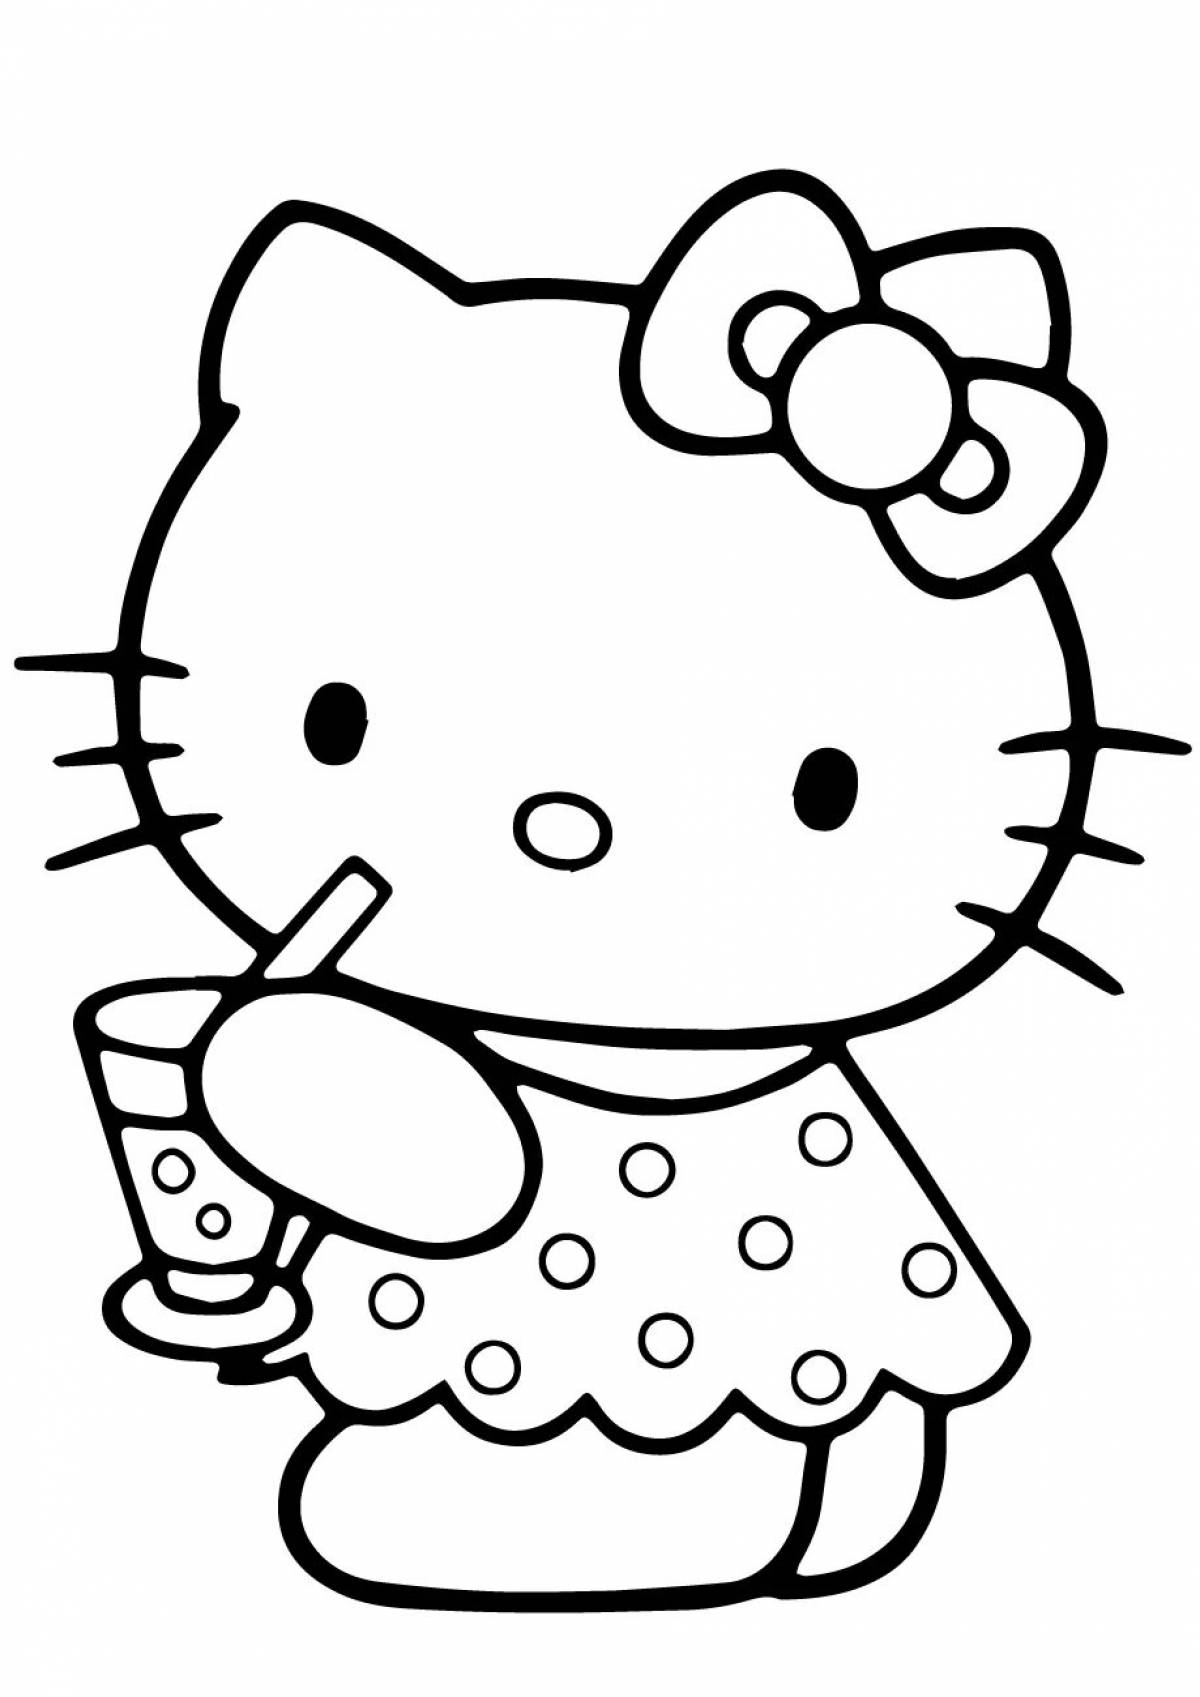 Shiny hello kitty and her friends coloring book